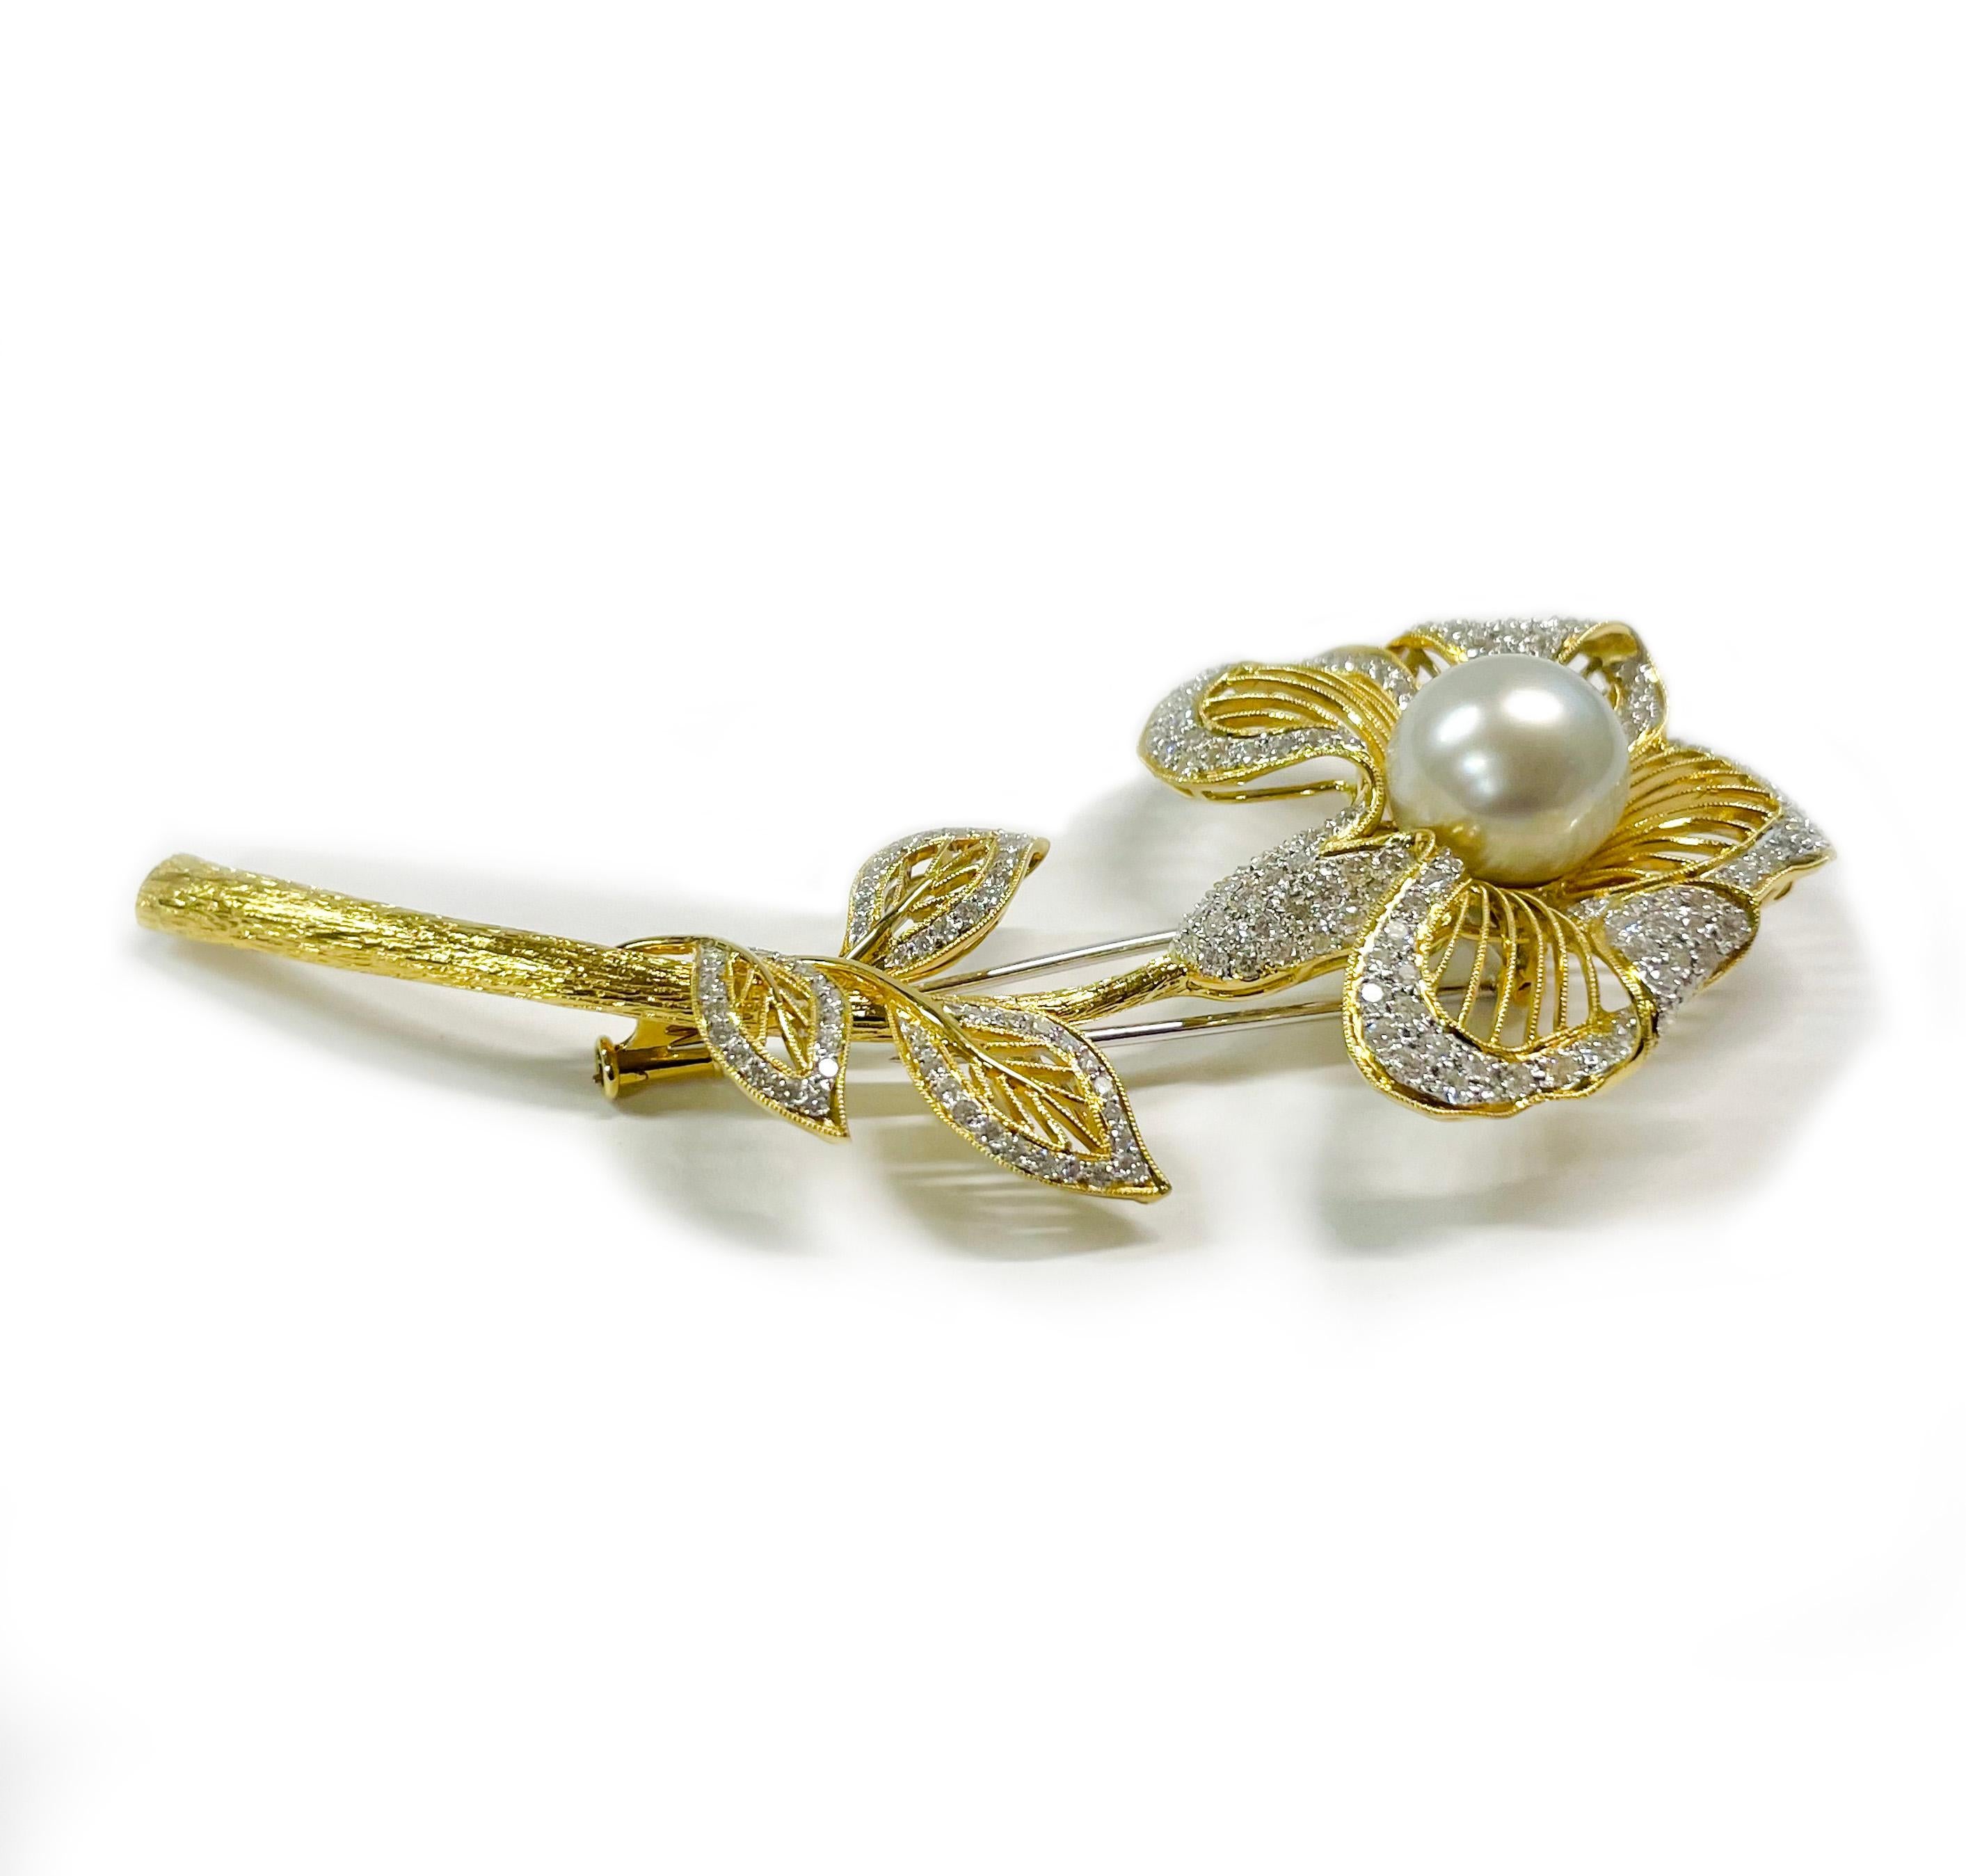 18 Karat Yellow and White Gold Diamond Pearl Flower Brooch. The brooch features an 11.5mm South Sea pearl and 171 round brilliant-cut diamonds. The pearl has good luster with hues of pink and blue. The diamonds adorn the surround of the flower